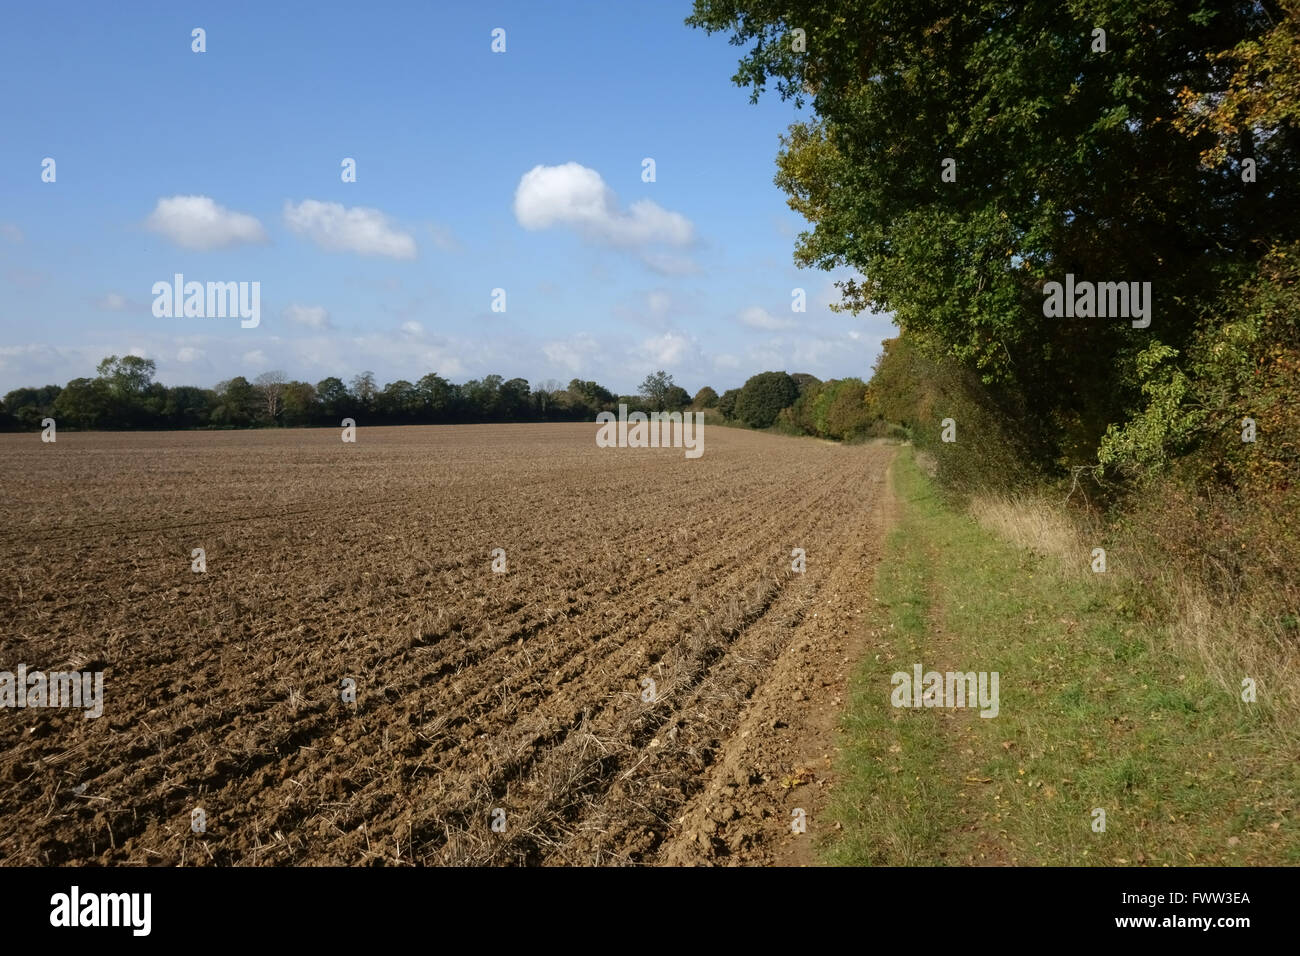 Newly drilled minimally cultivated seedbed for a cereal crop with trees changing to autumn colours, Berkshire, October Stock Photo